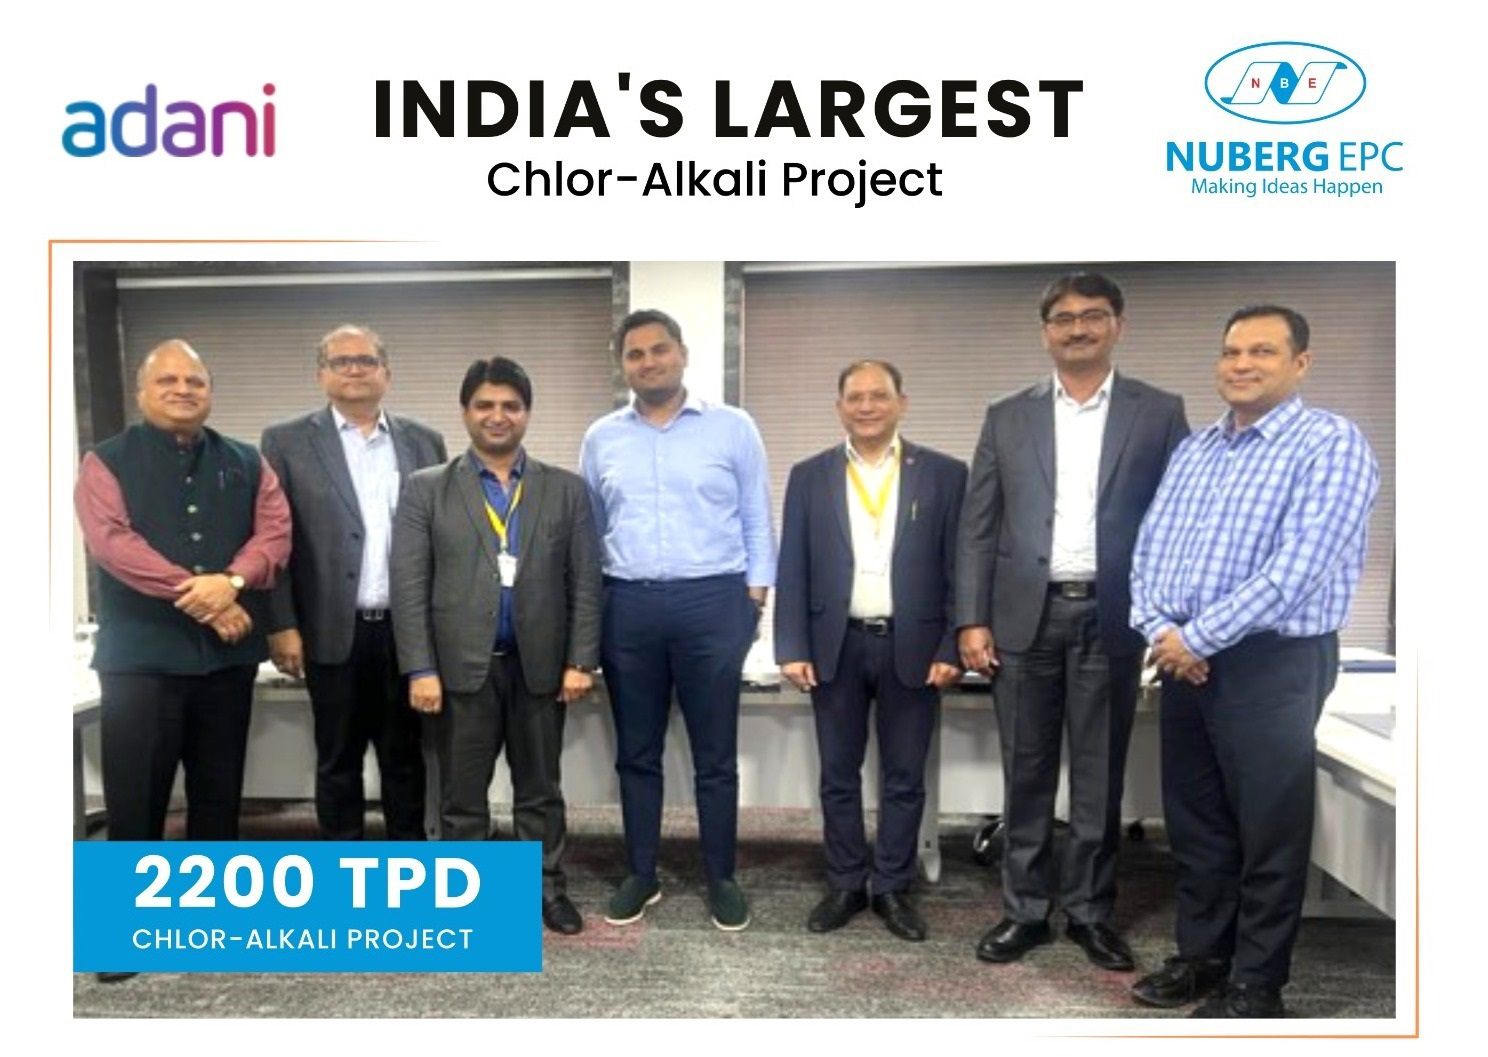 India's Largest Chlor-Alkali Project for Adani Group